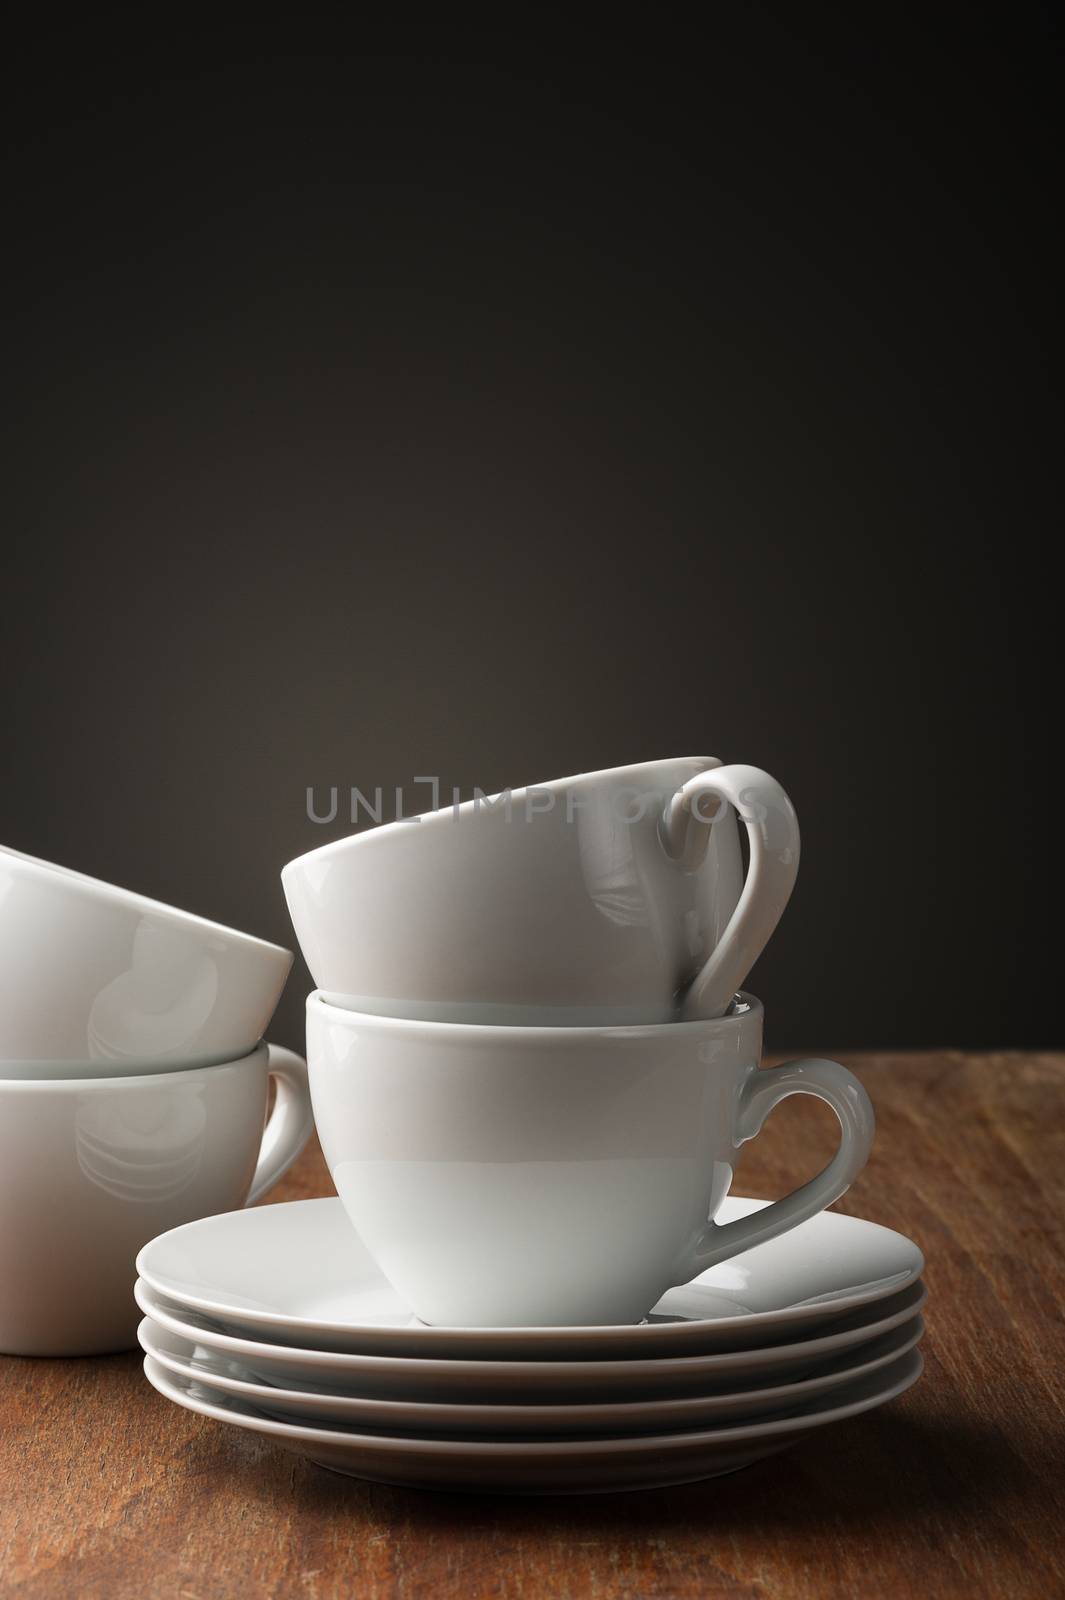 Two plain white pottery tea or coffee cups by MOELLERTHOMSEN